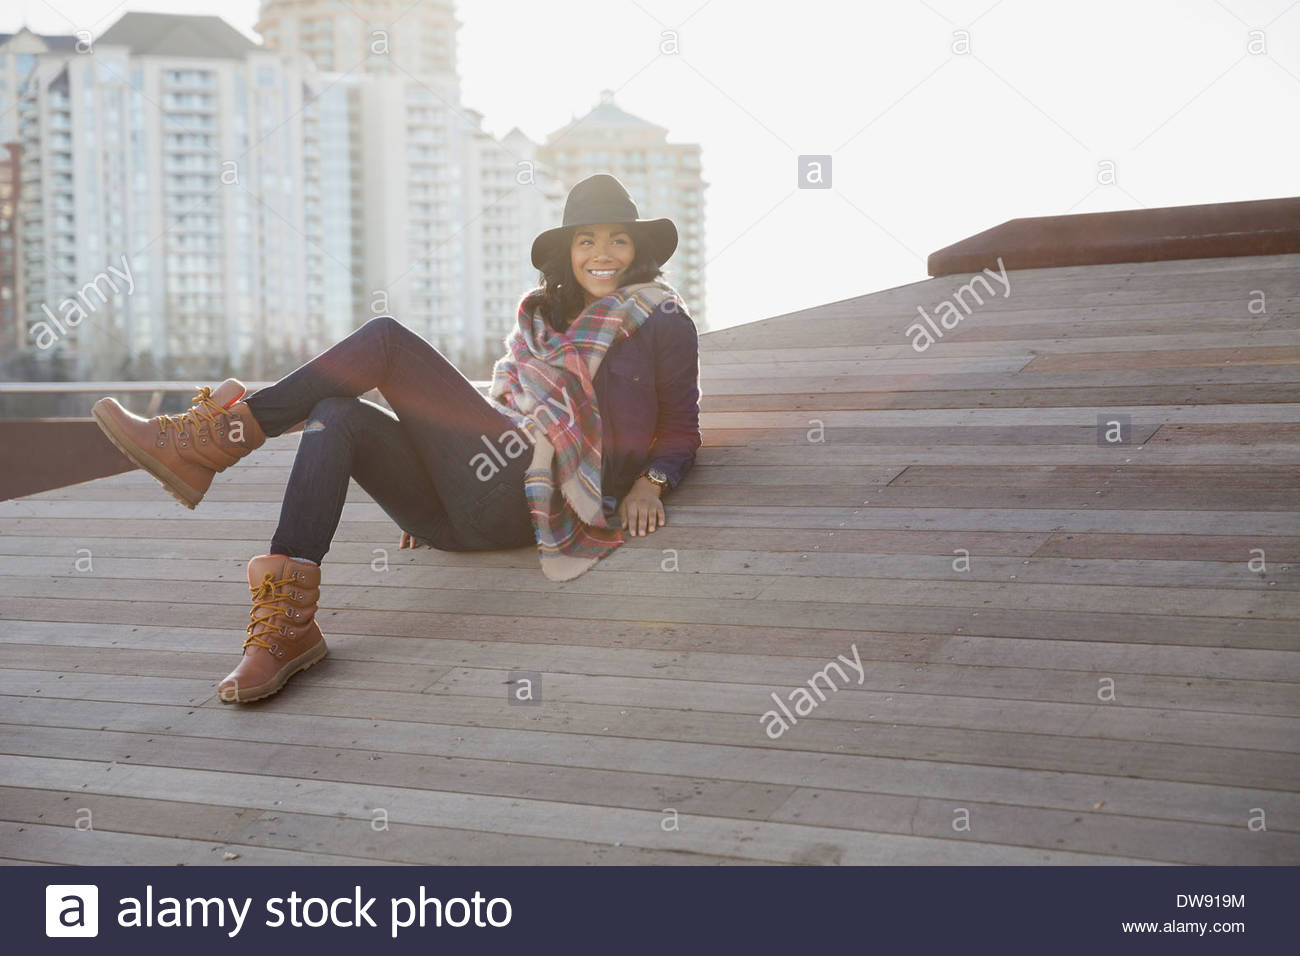 Fashionable woman relaxing outdoors Stock Photo